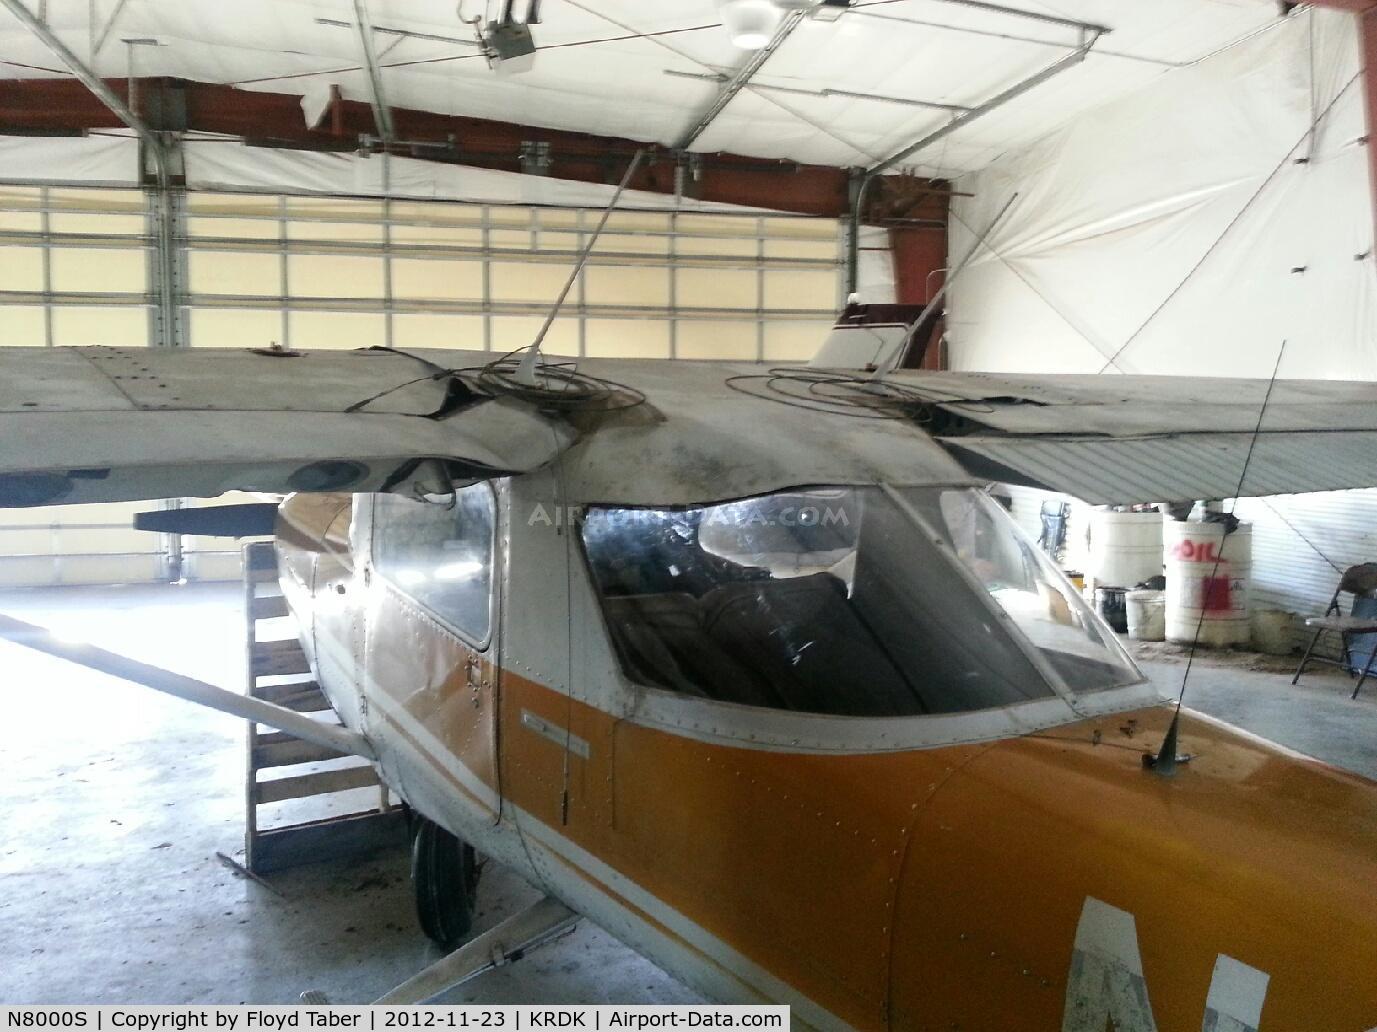 N8000S, 1965 Cessna 150F C/N 15061600, Substantially Damaged and will probably be written off